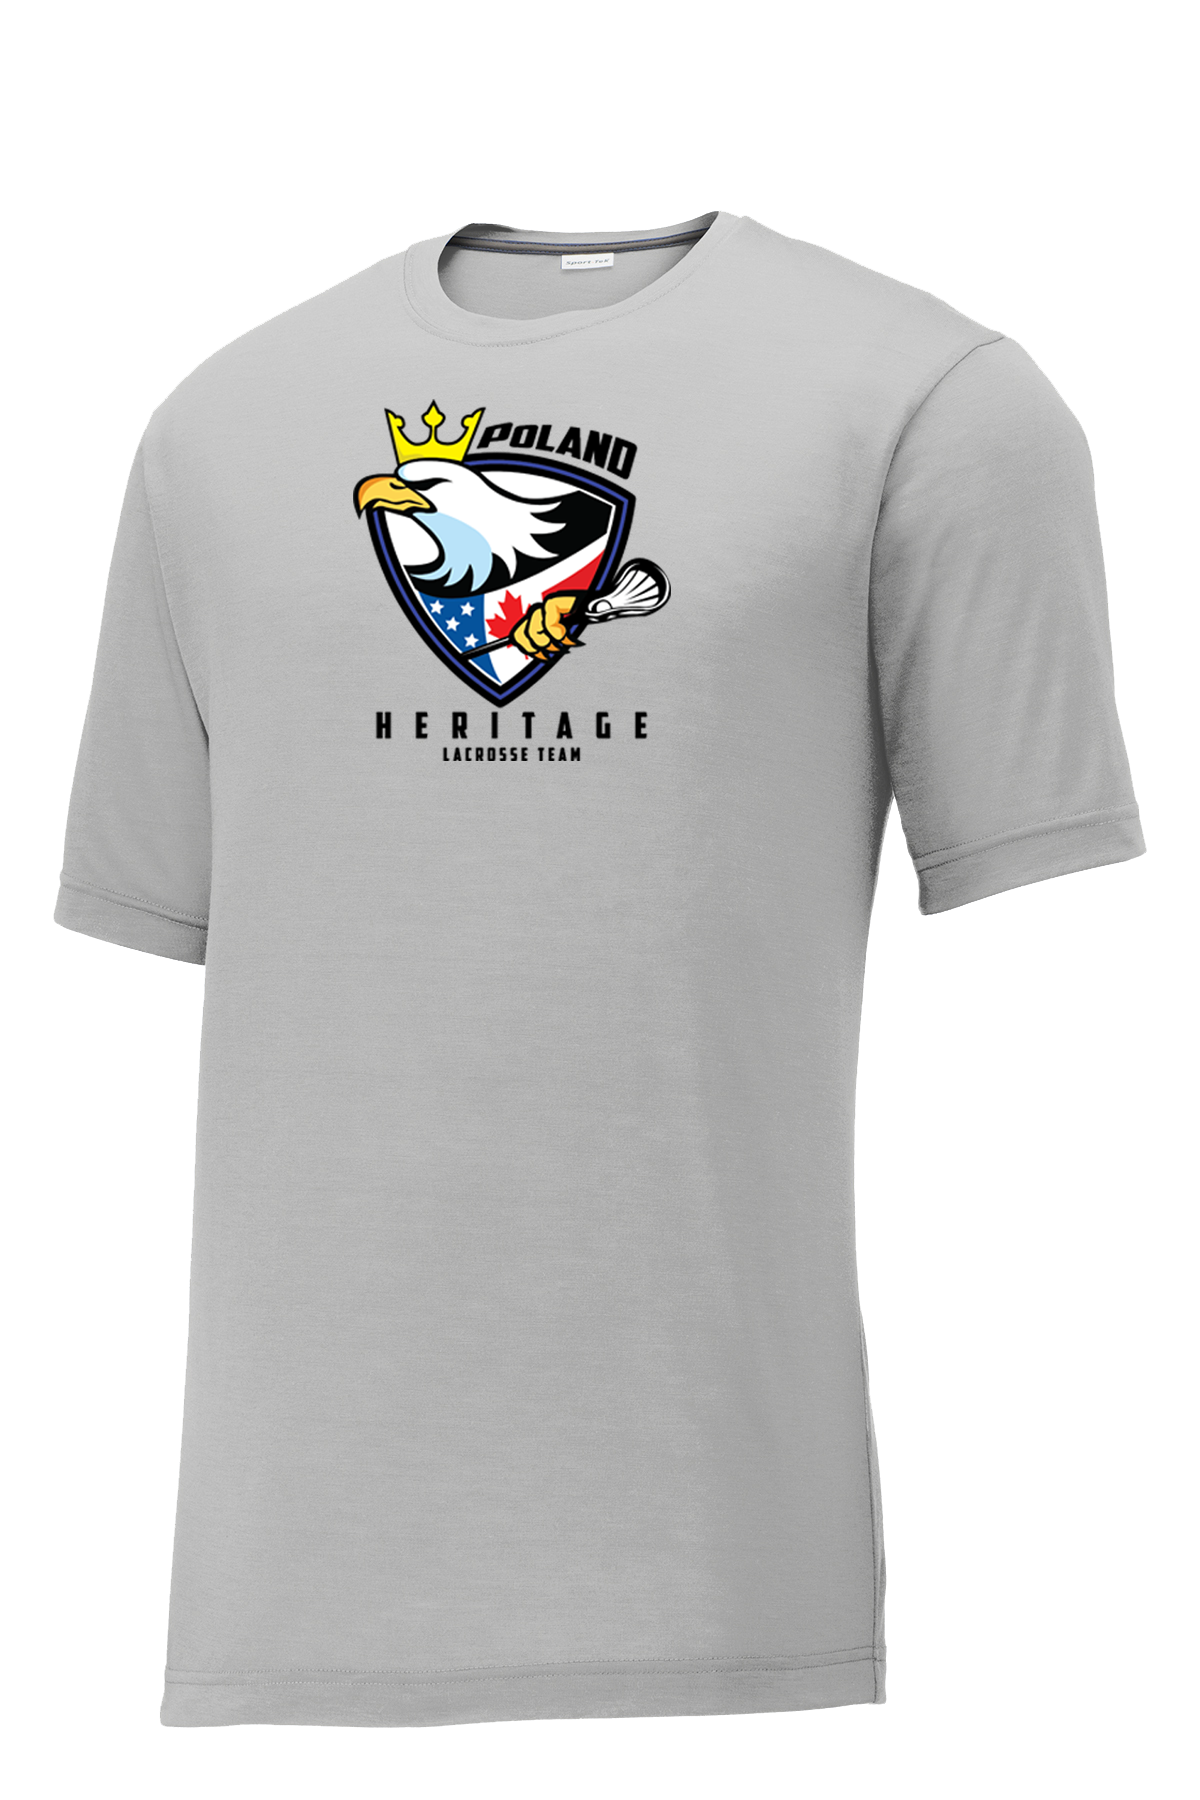 Poland Heritage Team Silver CottonTouch Performance T-Shirt